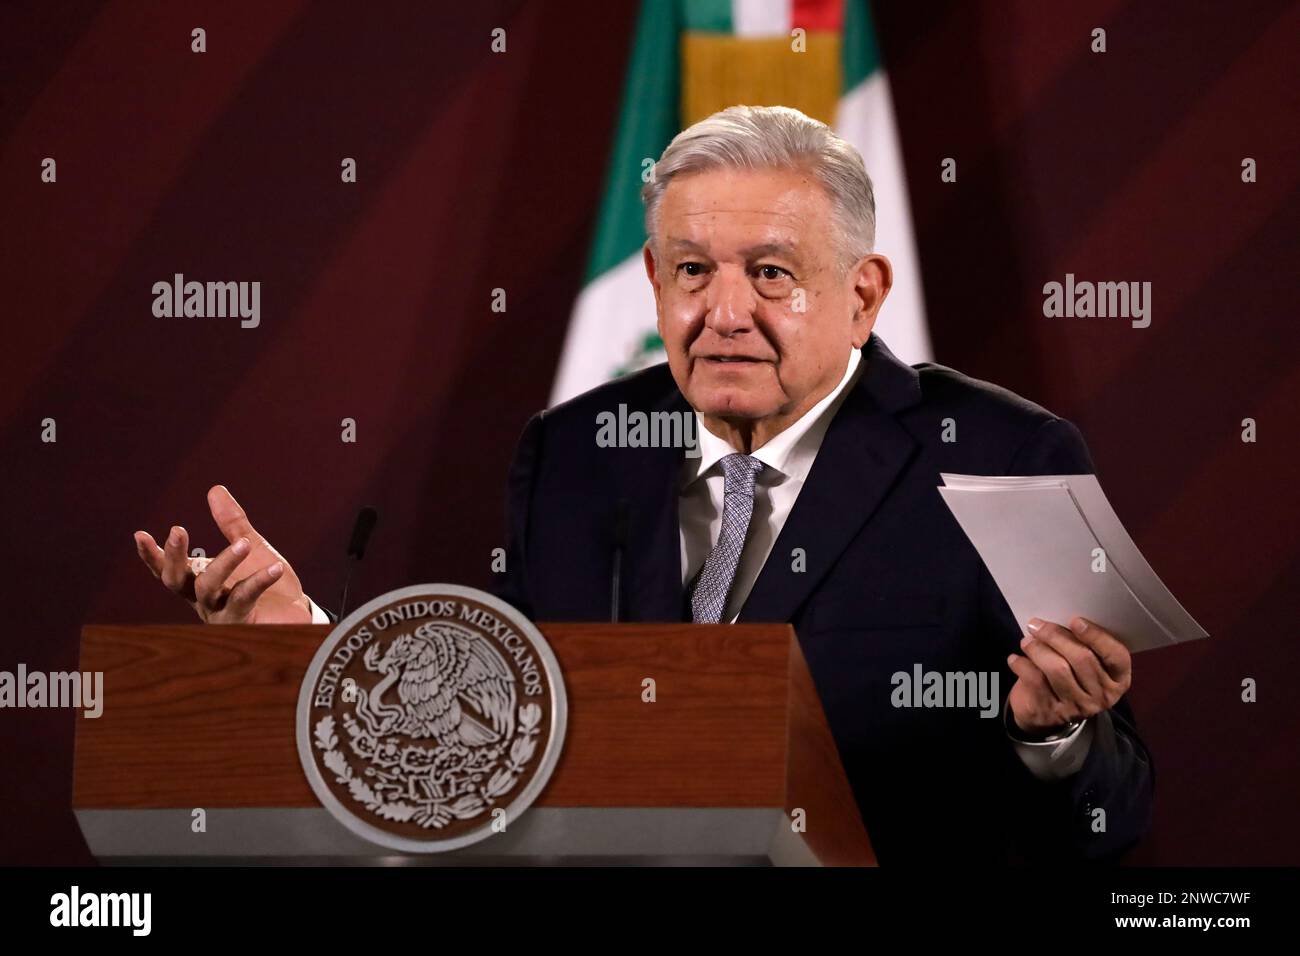 February 28, 2023, Mexico City, Mexico: The President of Mexico, Andres Manuel Lopez Obrador confirms the installation of the Tesla automotive assembly plant in Mexico, at a press conference at the National Palace in Mexico City. on February 28, 2023 in Mexico City, Mexico (Photo by Luis Barron / Eyepix Group). Stock Photo